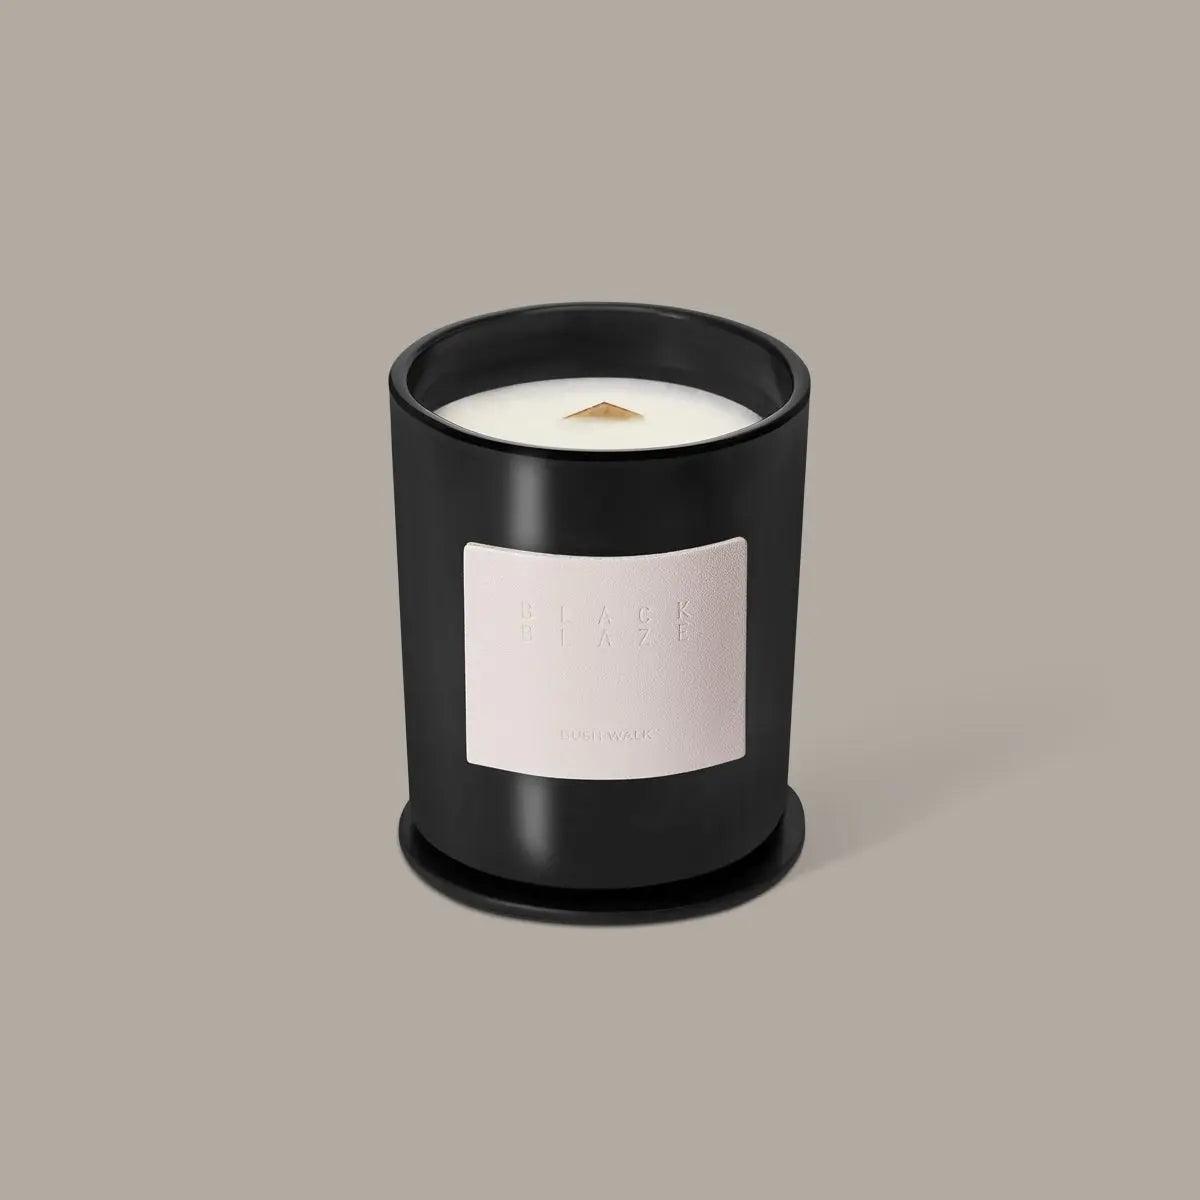 Bush Walk Scented Candle - BLACK BLAZE - THE GREAT OUTDOOR COLLECTION - BLACK BLAZE